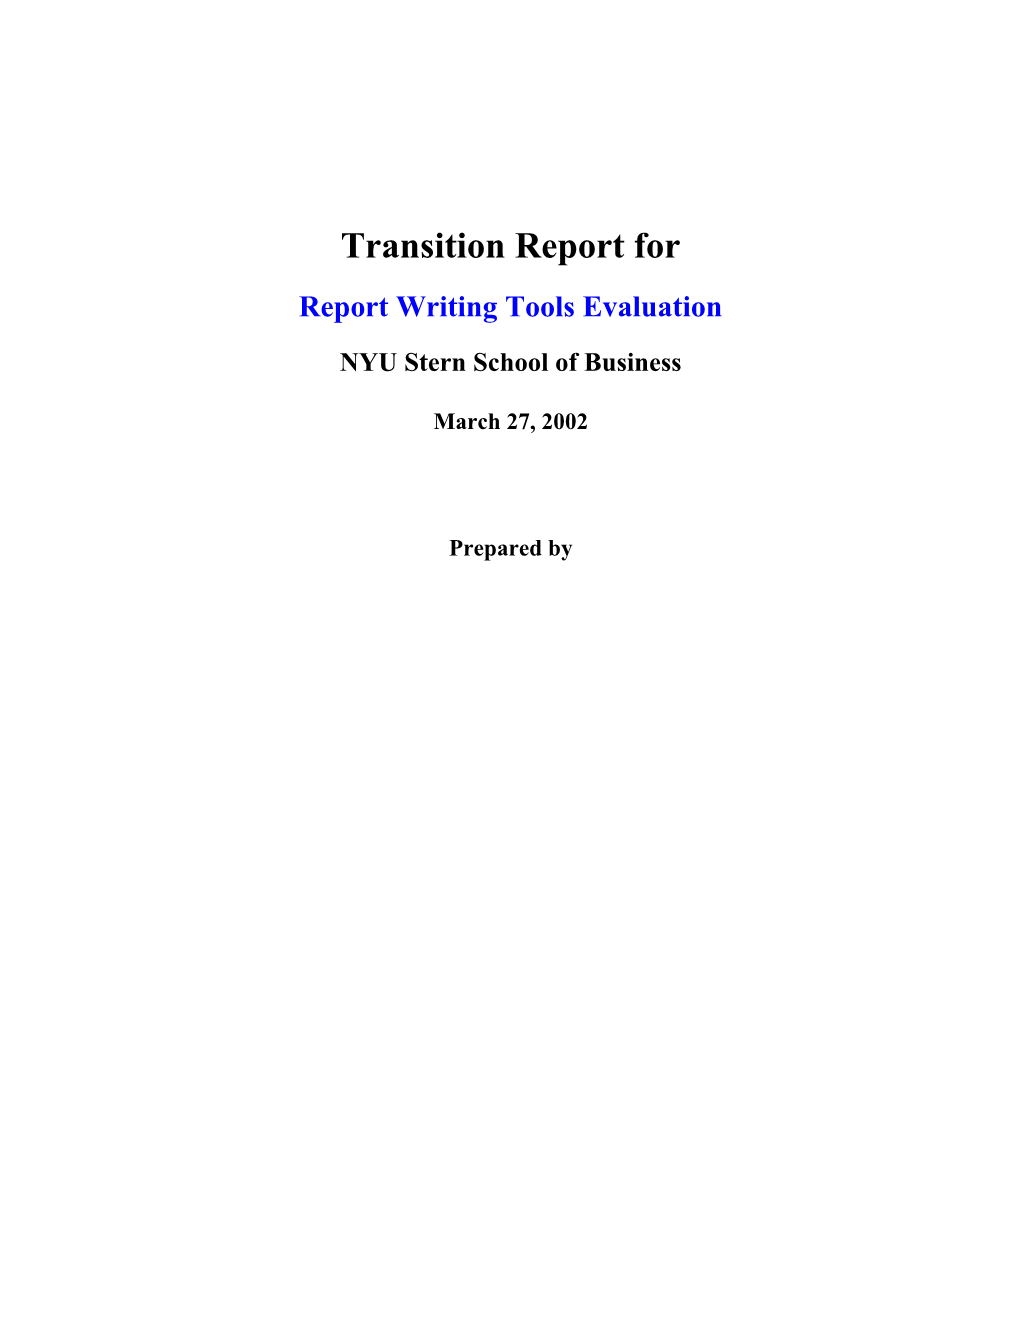 Preliminary Reports on Database Access Capabilities of Tools